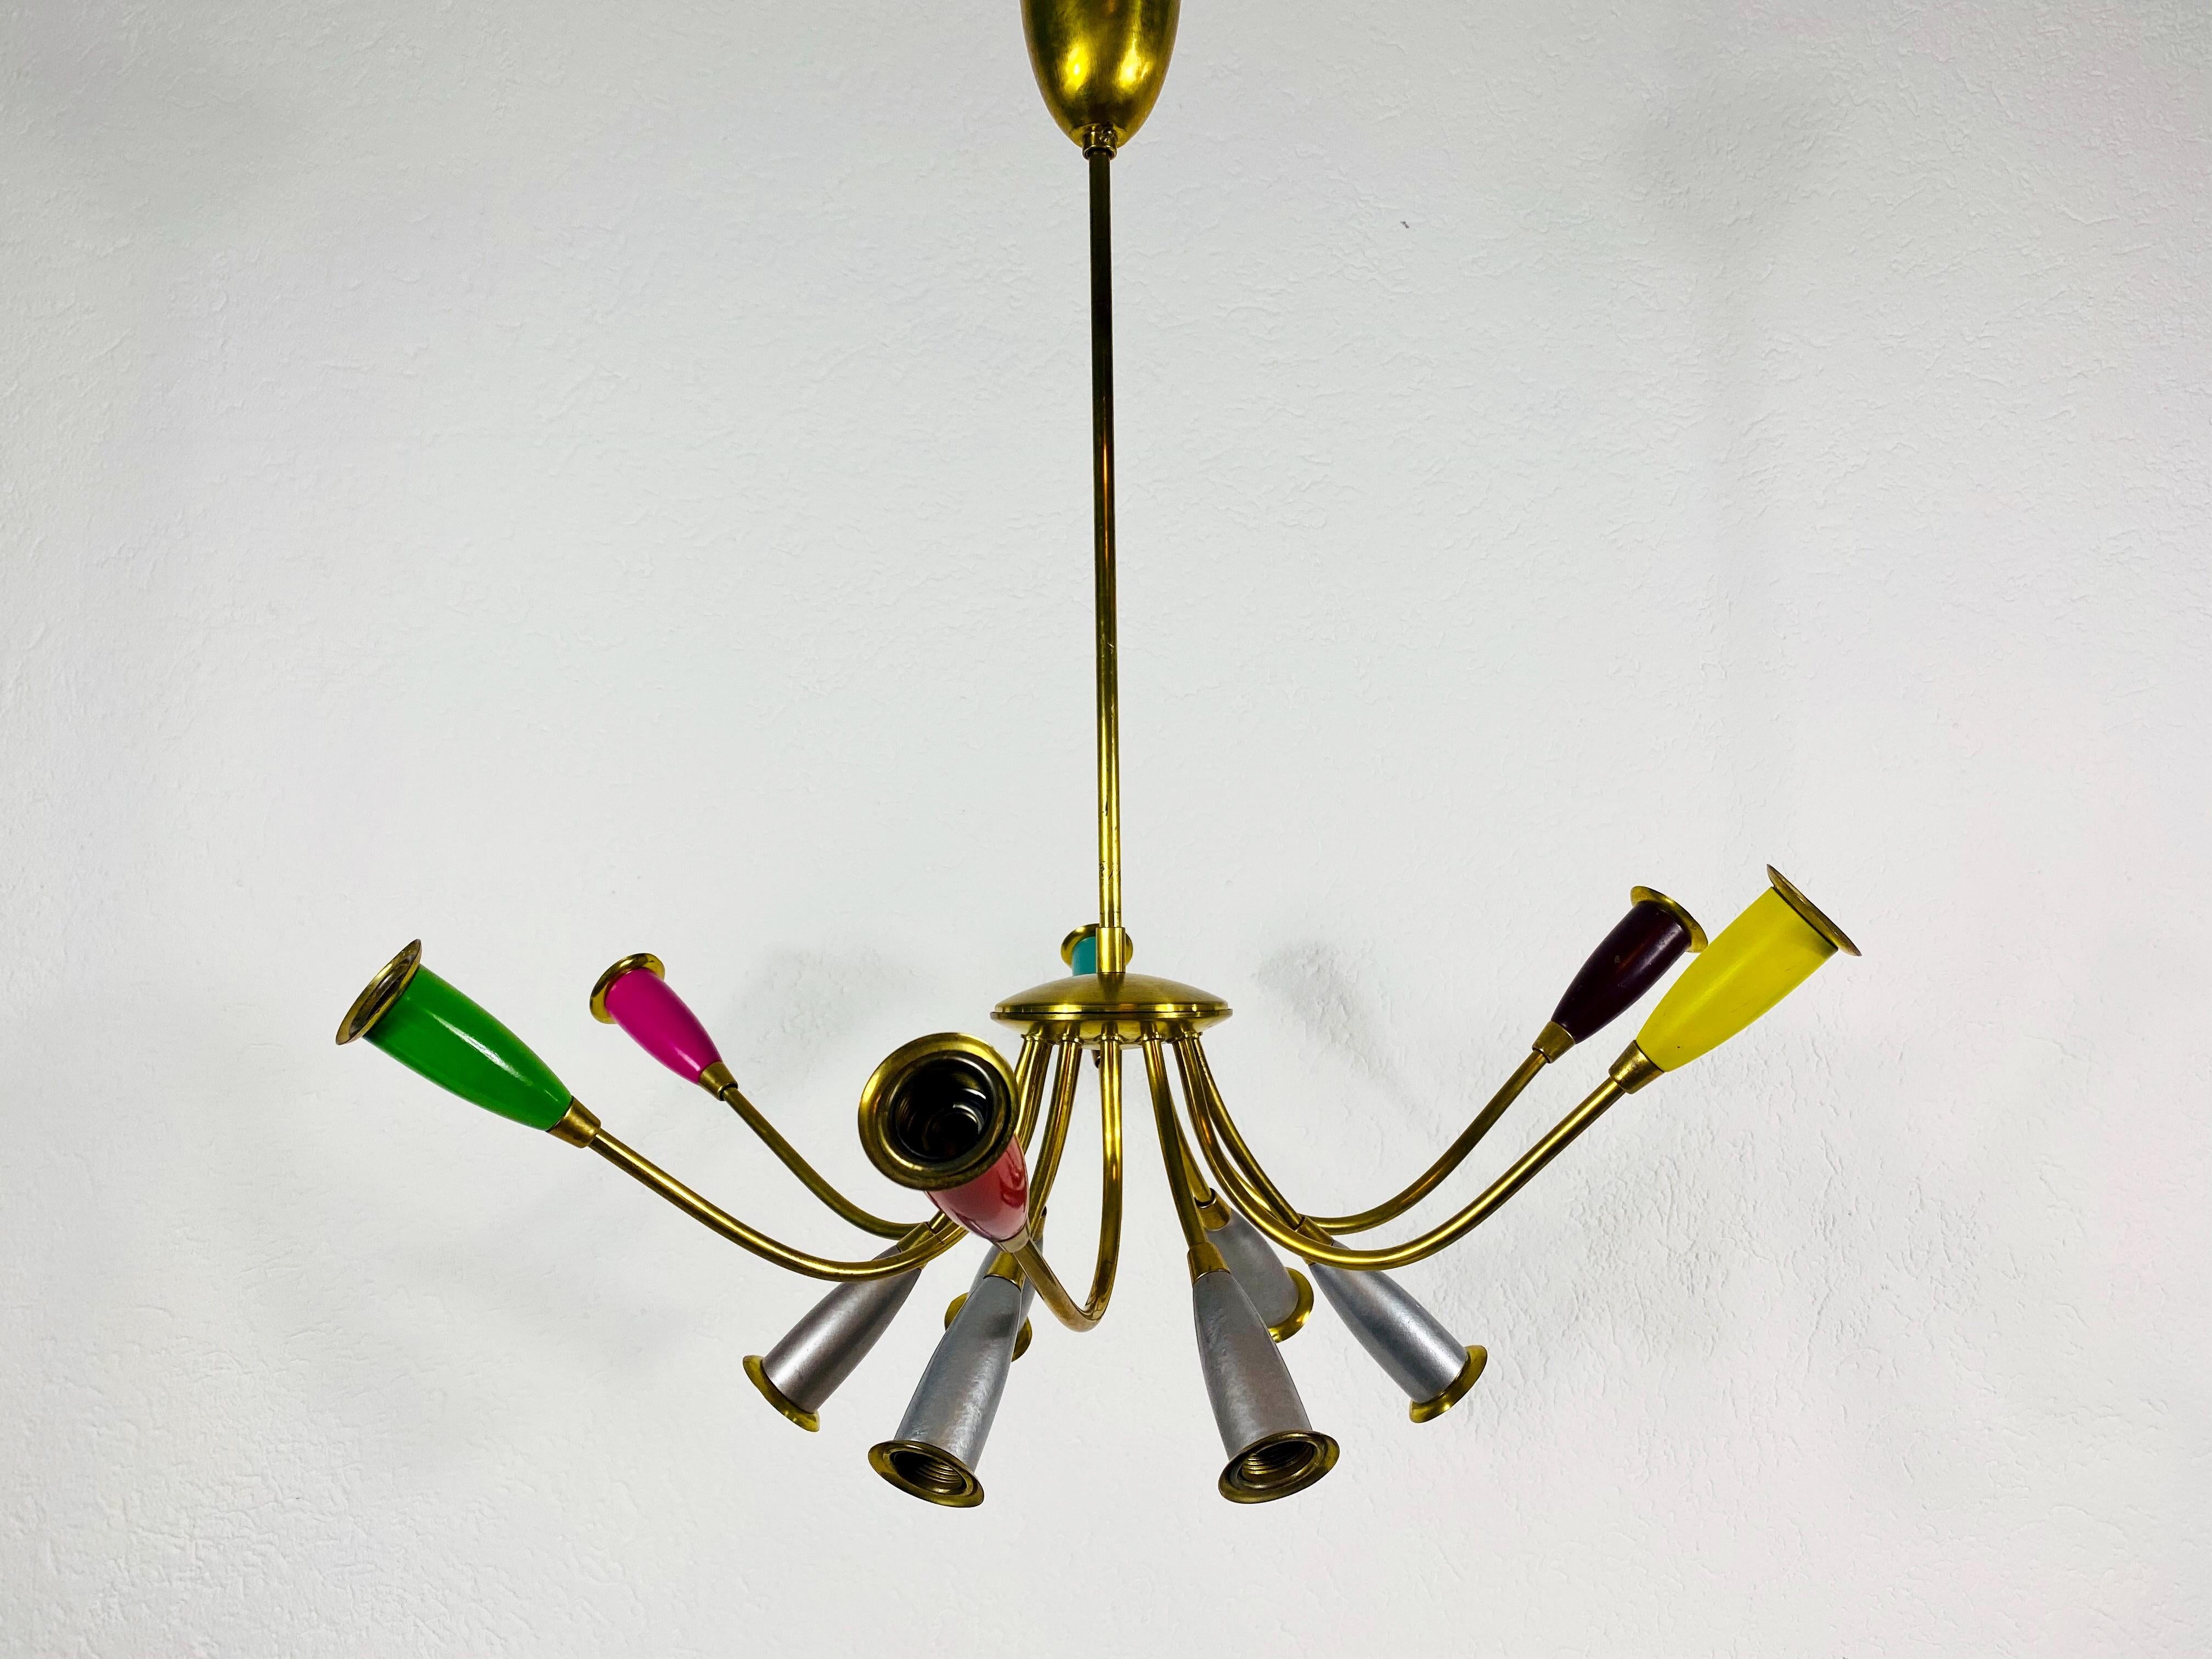 A colorful Sputnik chandelier attributed to Arredoluce and made in Italy in the 1950s. It is fascinating with its twelve brass arms, each of it with an E14 light bulb. The shape of the light is similar to a spider.

The light requires 12 E14 light